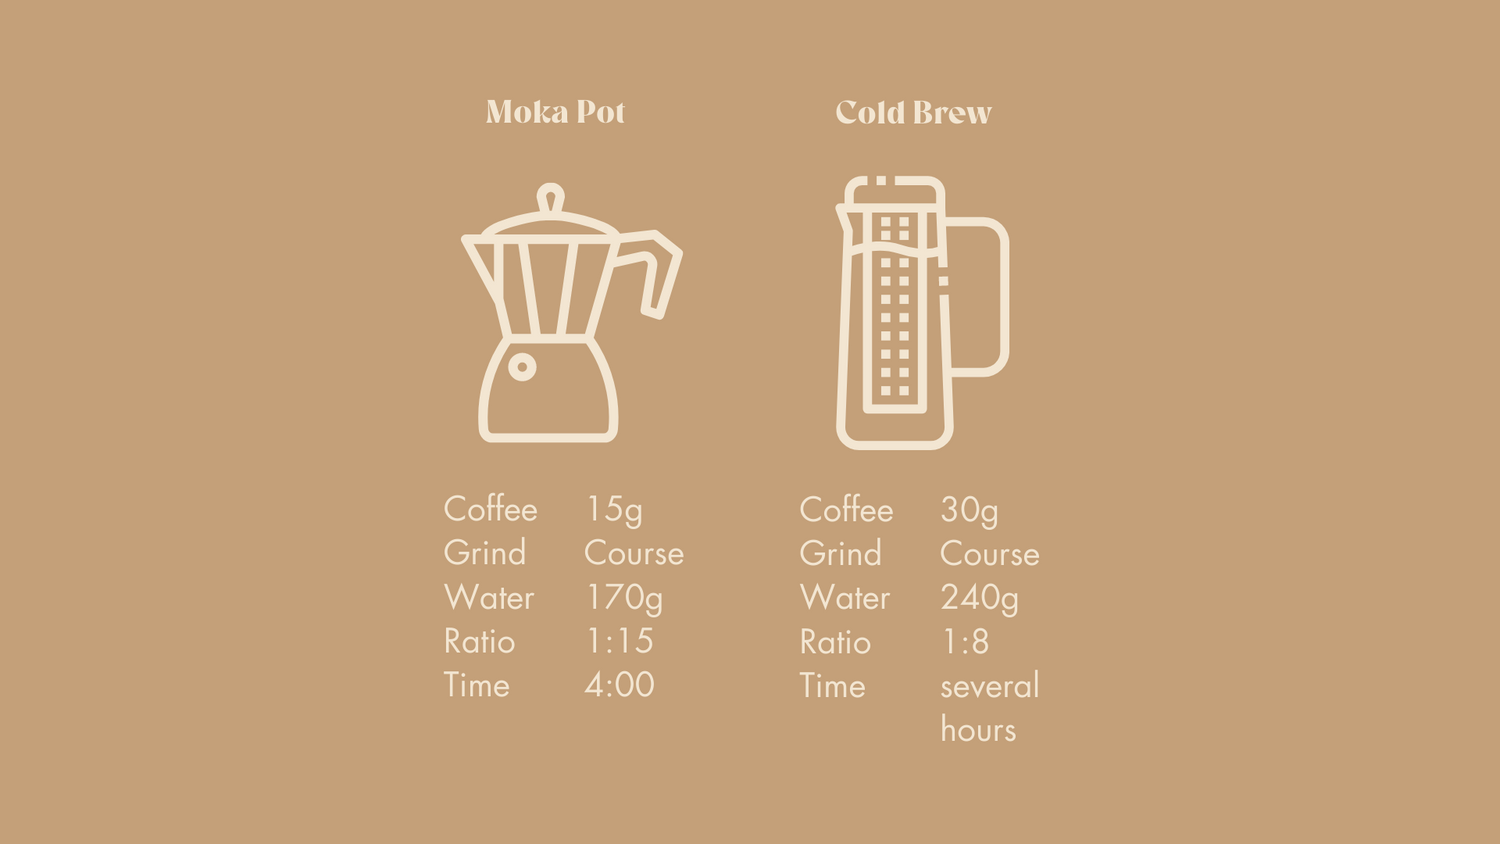 Instructions on how to use coffee beans to make coffee with a moka pot and cold brew